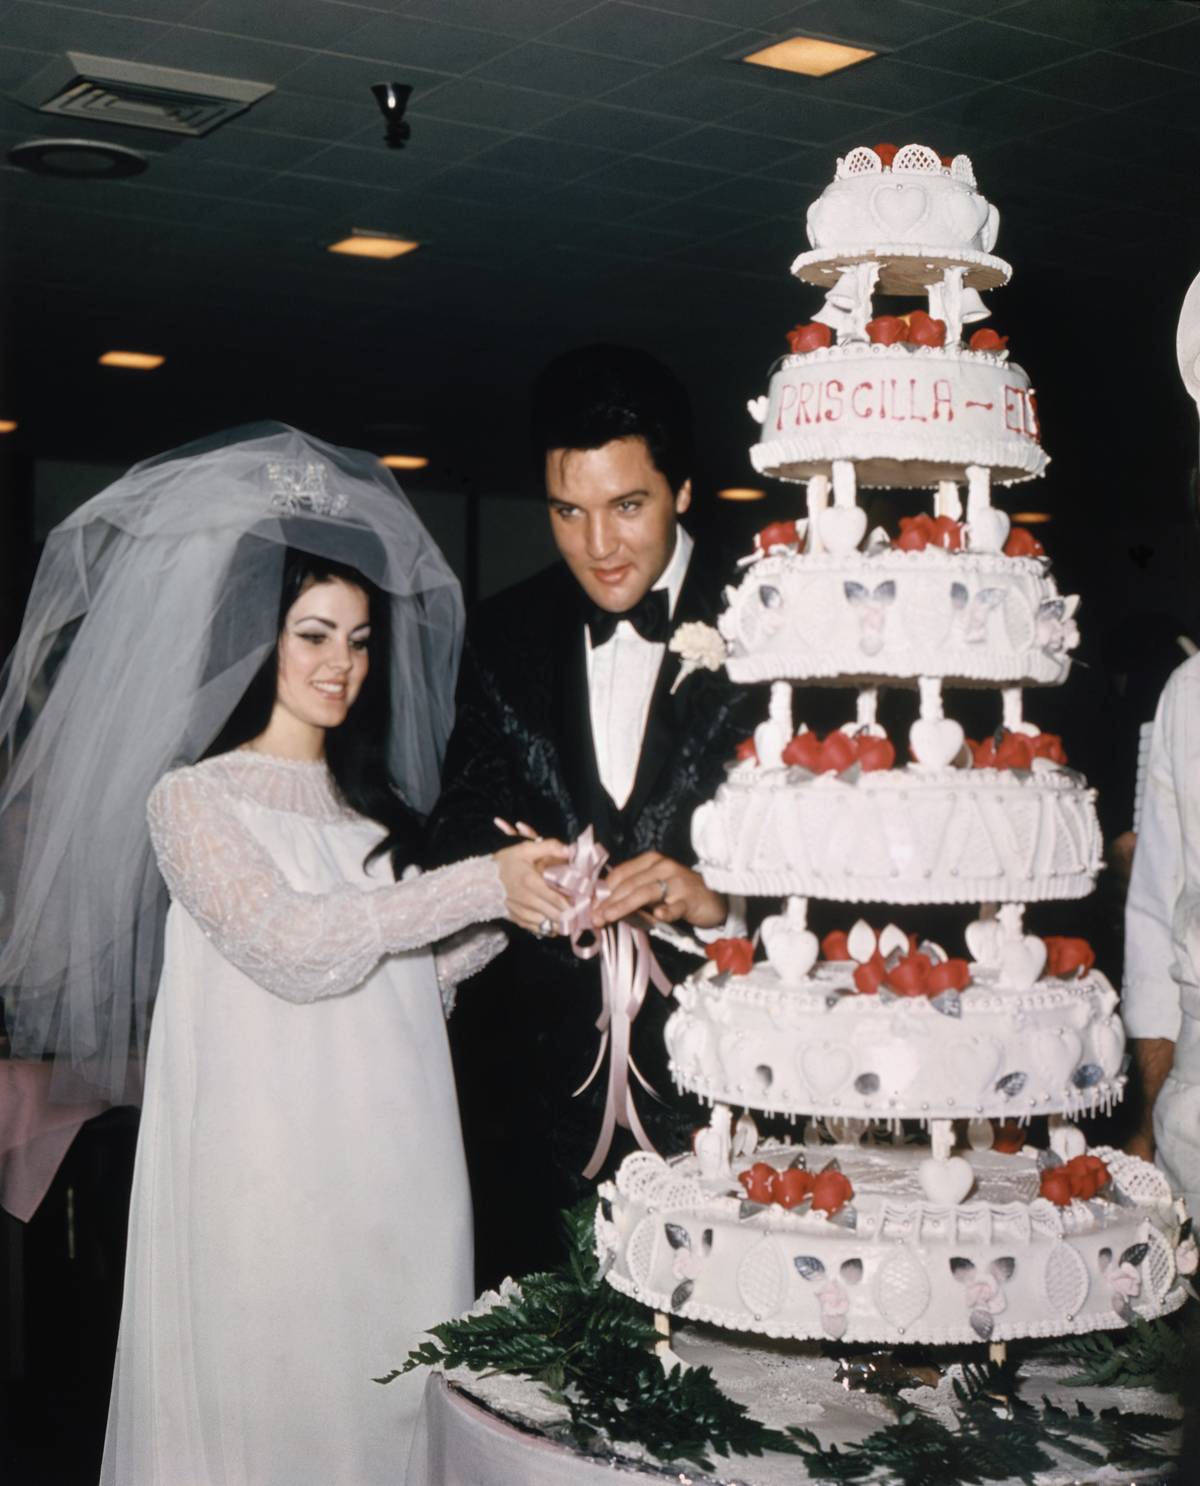 <p>Elvis and Priscilla were already in a relationship when they began filming, and Elvis had told Priscilla's family he wanted to marry her. Eventually, they did, but things weren't as simple as Priscilla had hoped. </p> <p>As the two stars got closer, rumors started flying, and tension built between them all. In the end, it was Elvis and Priscilla who made it down the aisle together.</p>